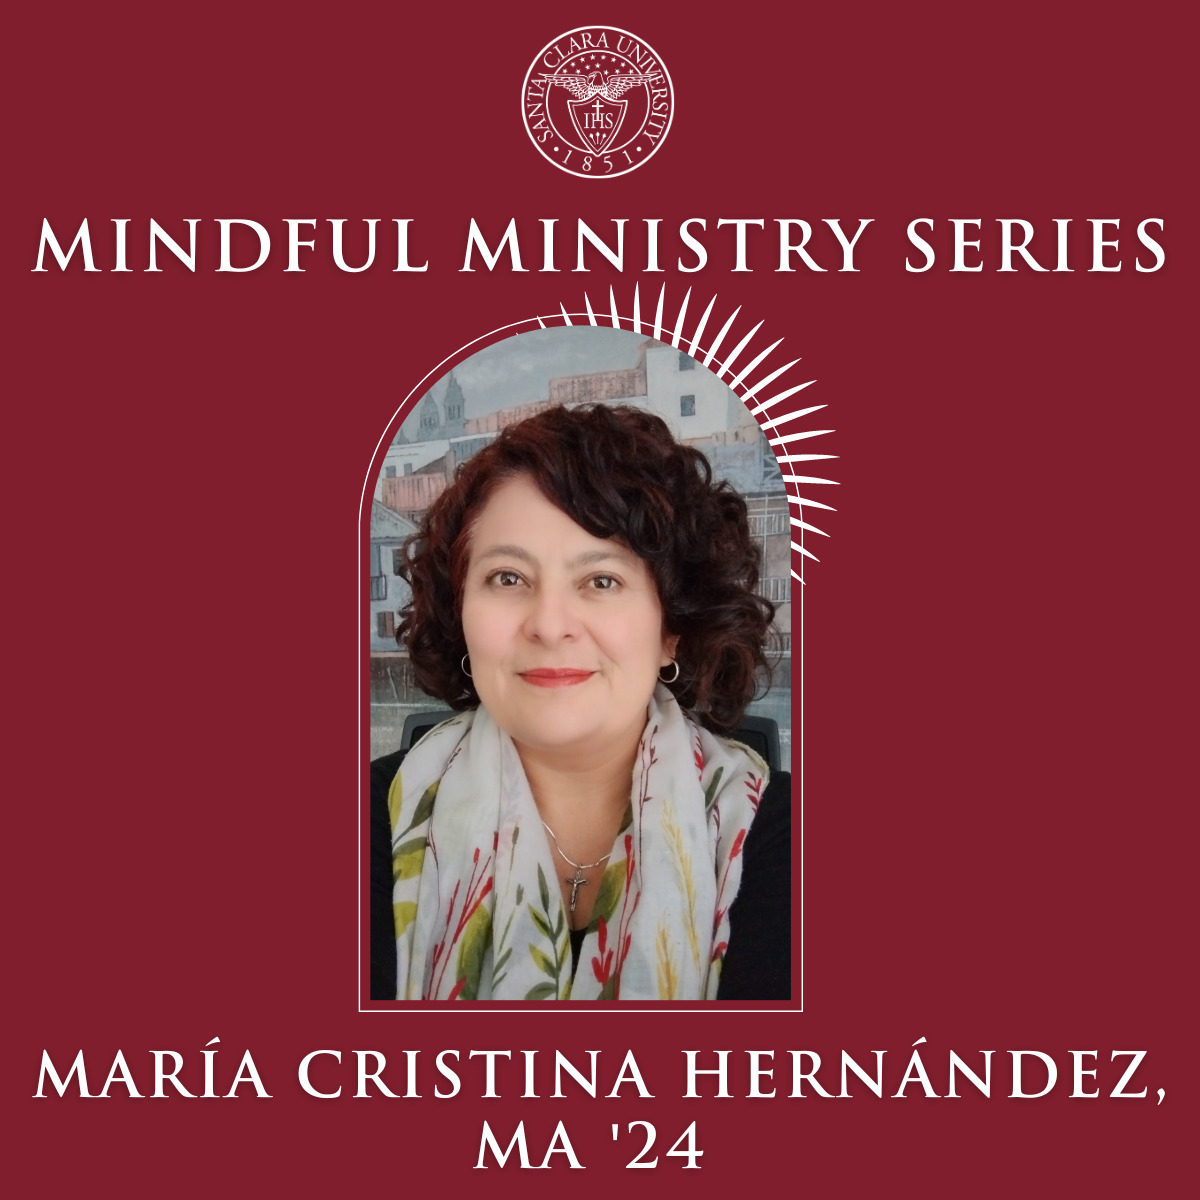 Mindful Ministry Series – Maria Cristina Hernandez, MA image link to story